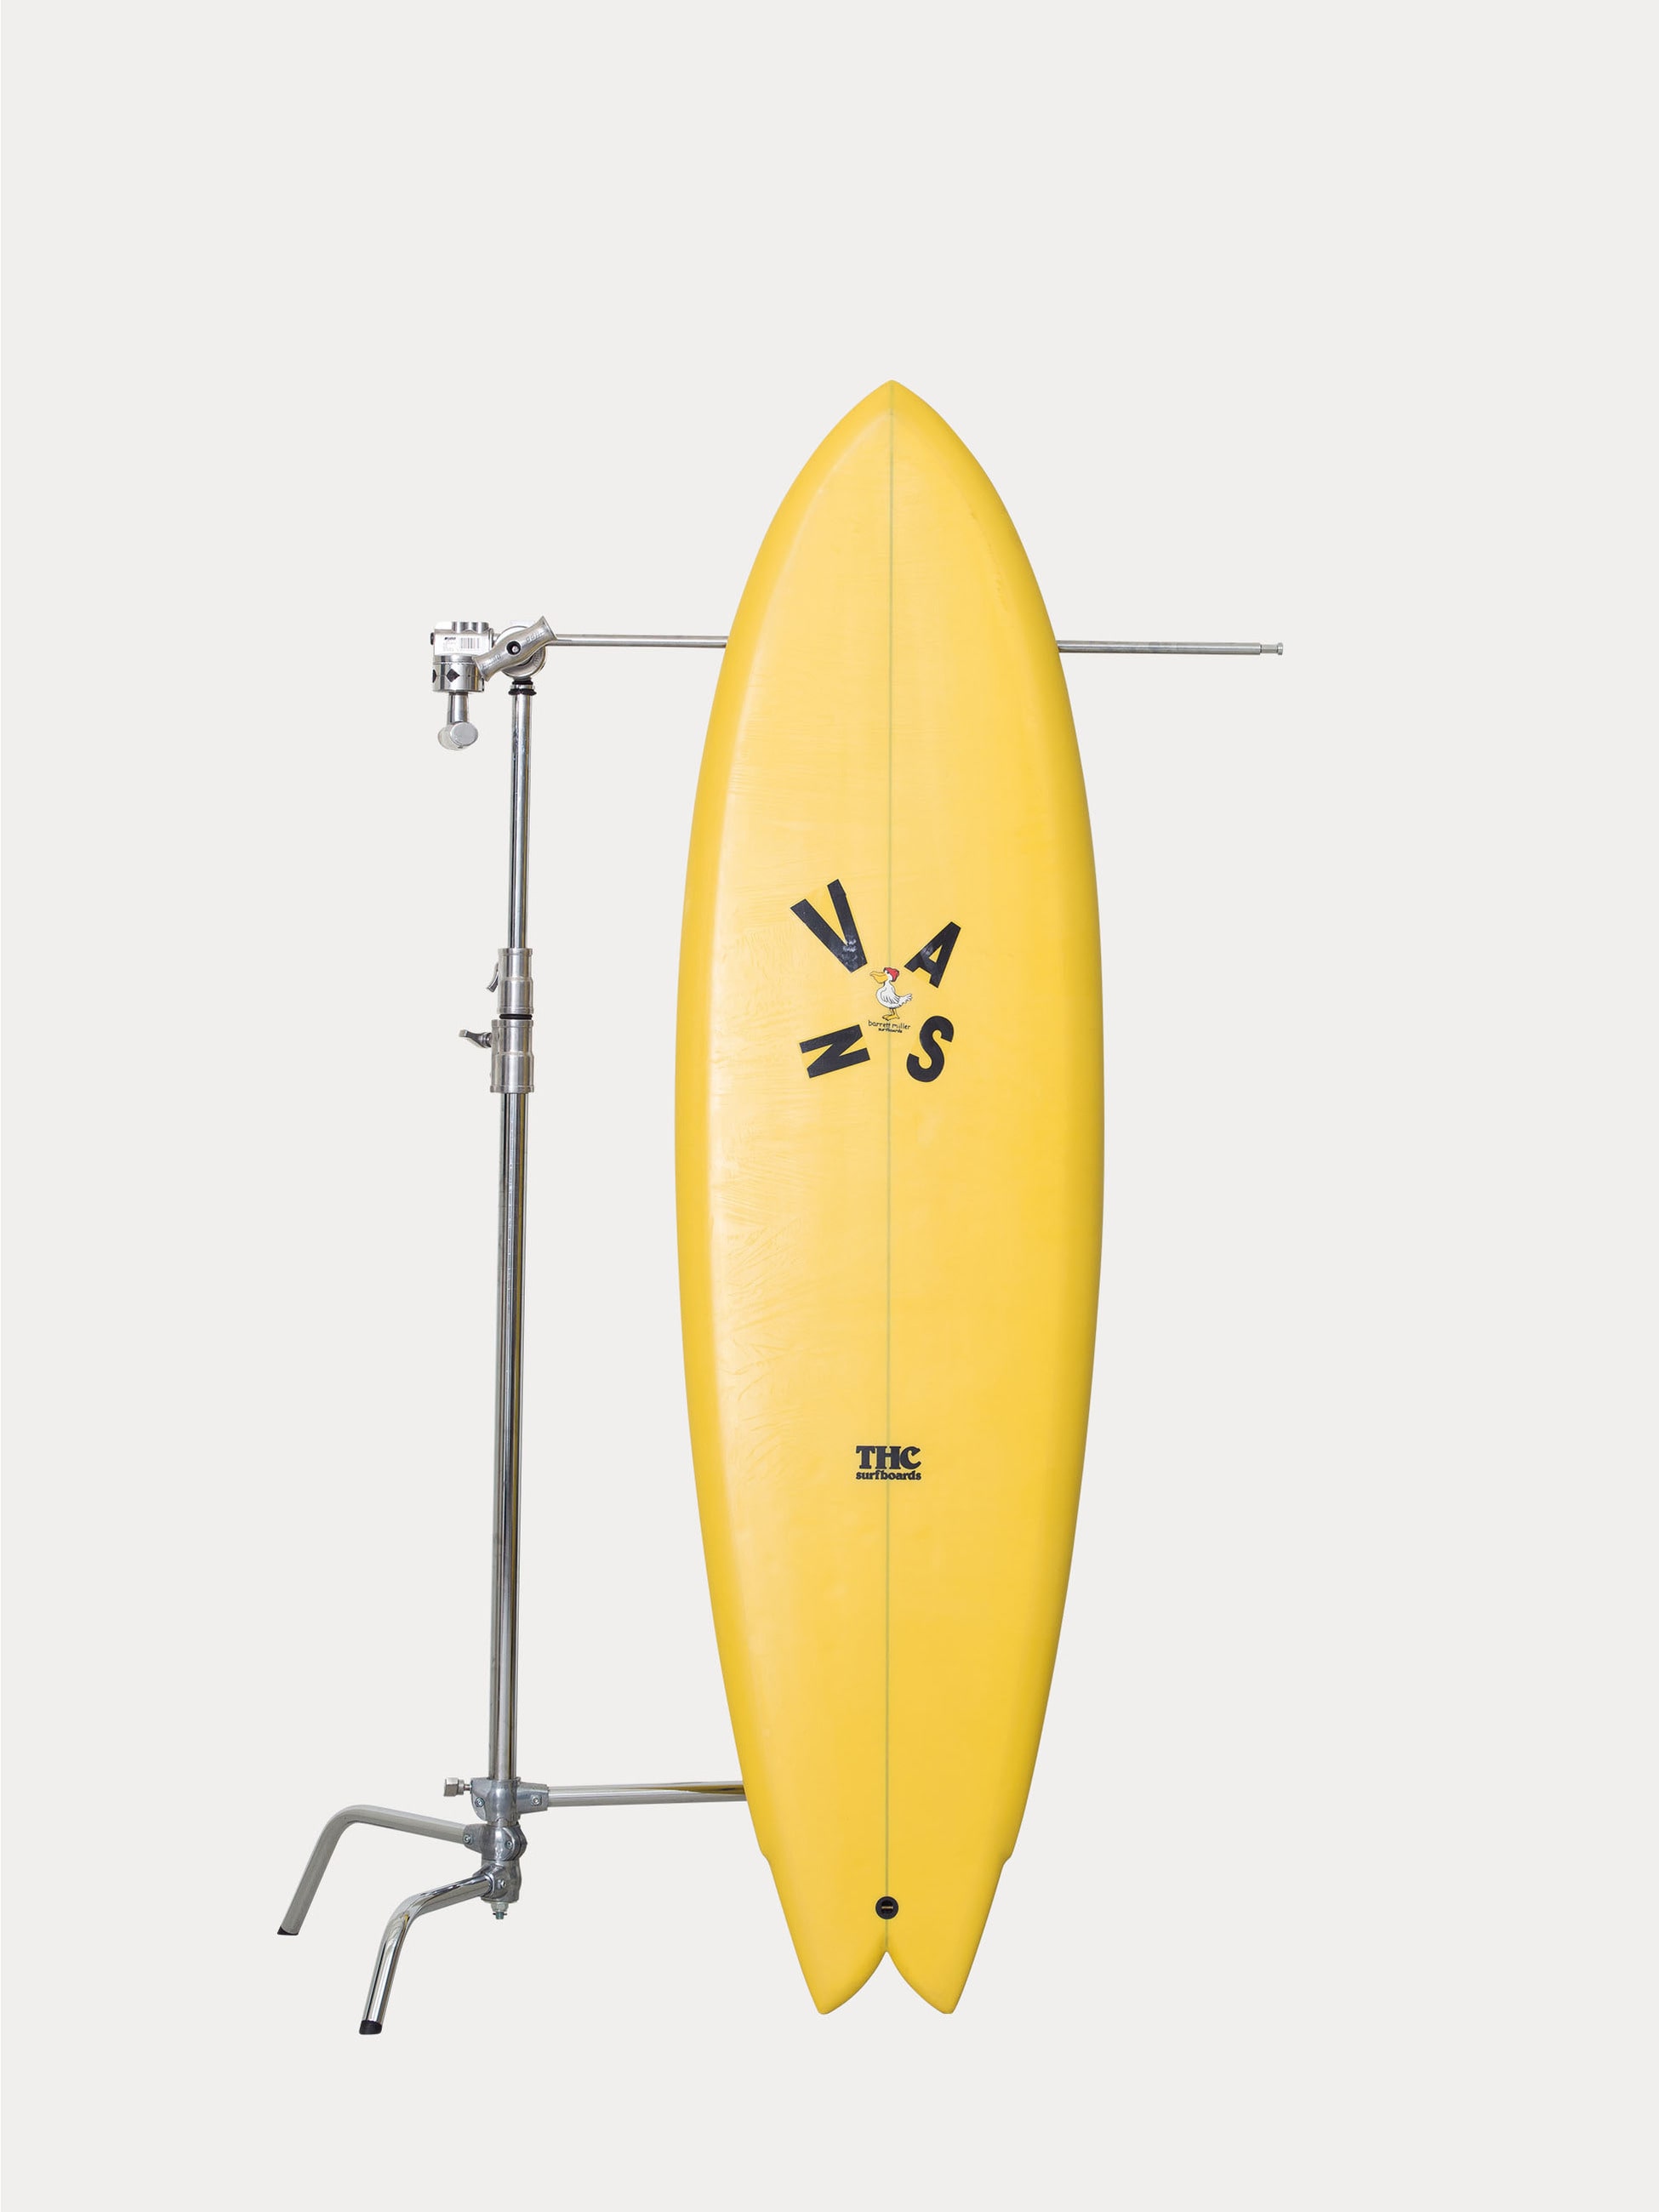 Surfboard Tosh's Personal Barret Shaped Egg 6‘3 詳細画像 yellow 1